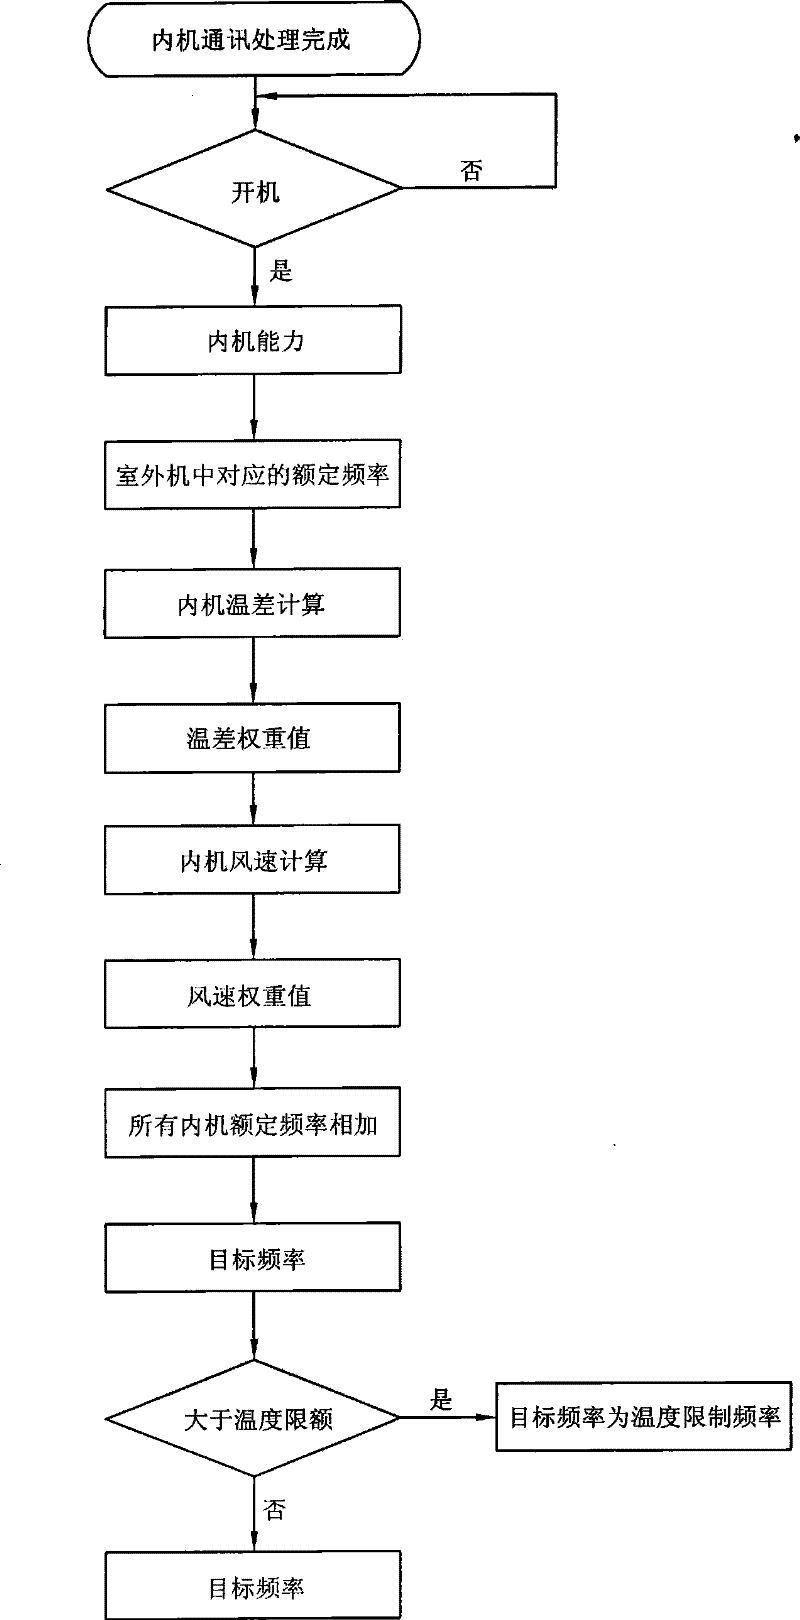 Method for controlling supply frequency of variable frequency compressor